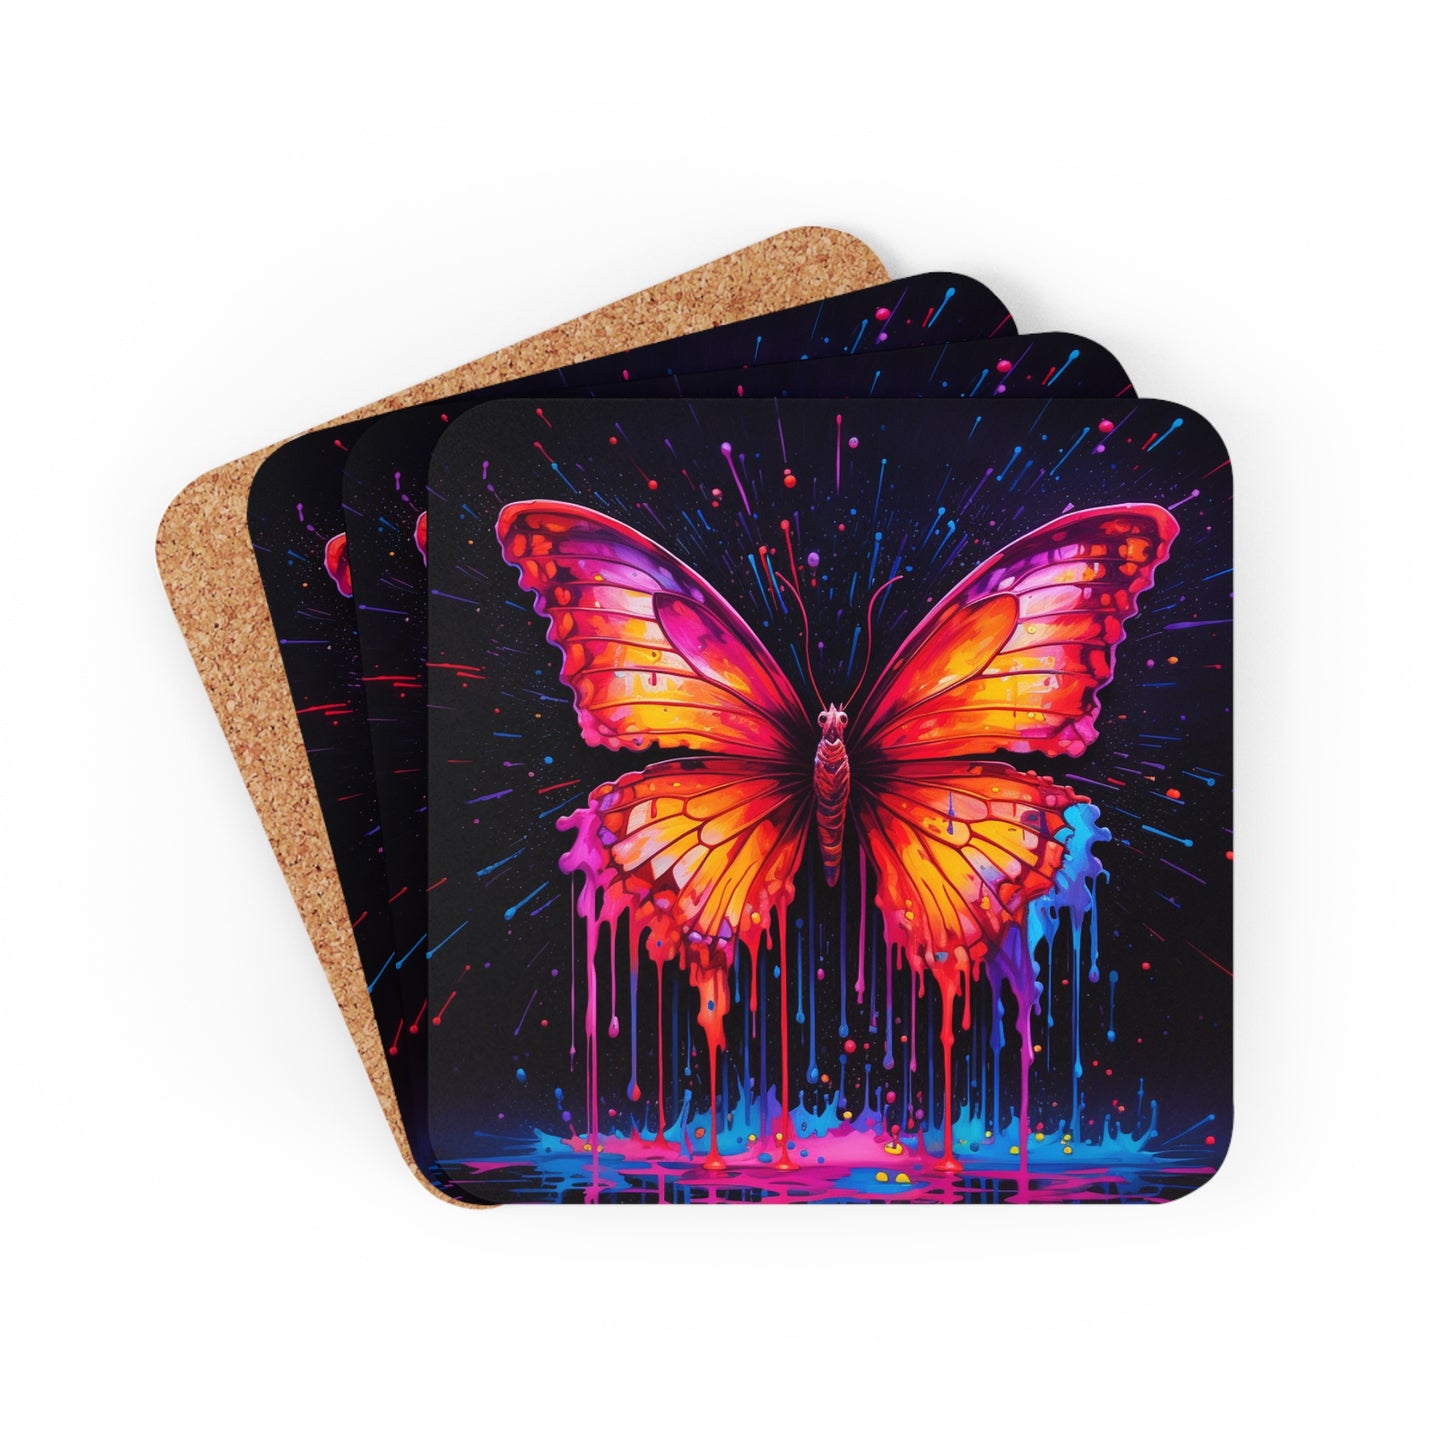 Corkwood Coaster Set Pink Butterfly Flair 4